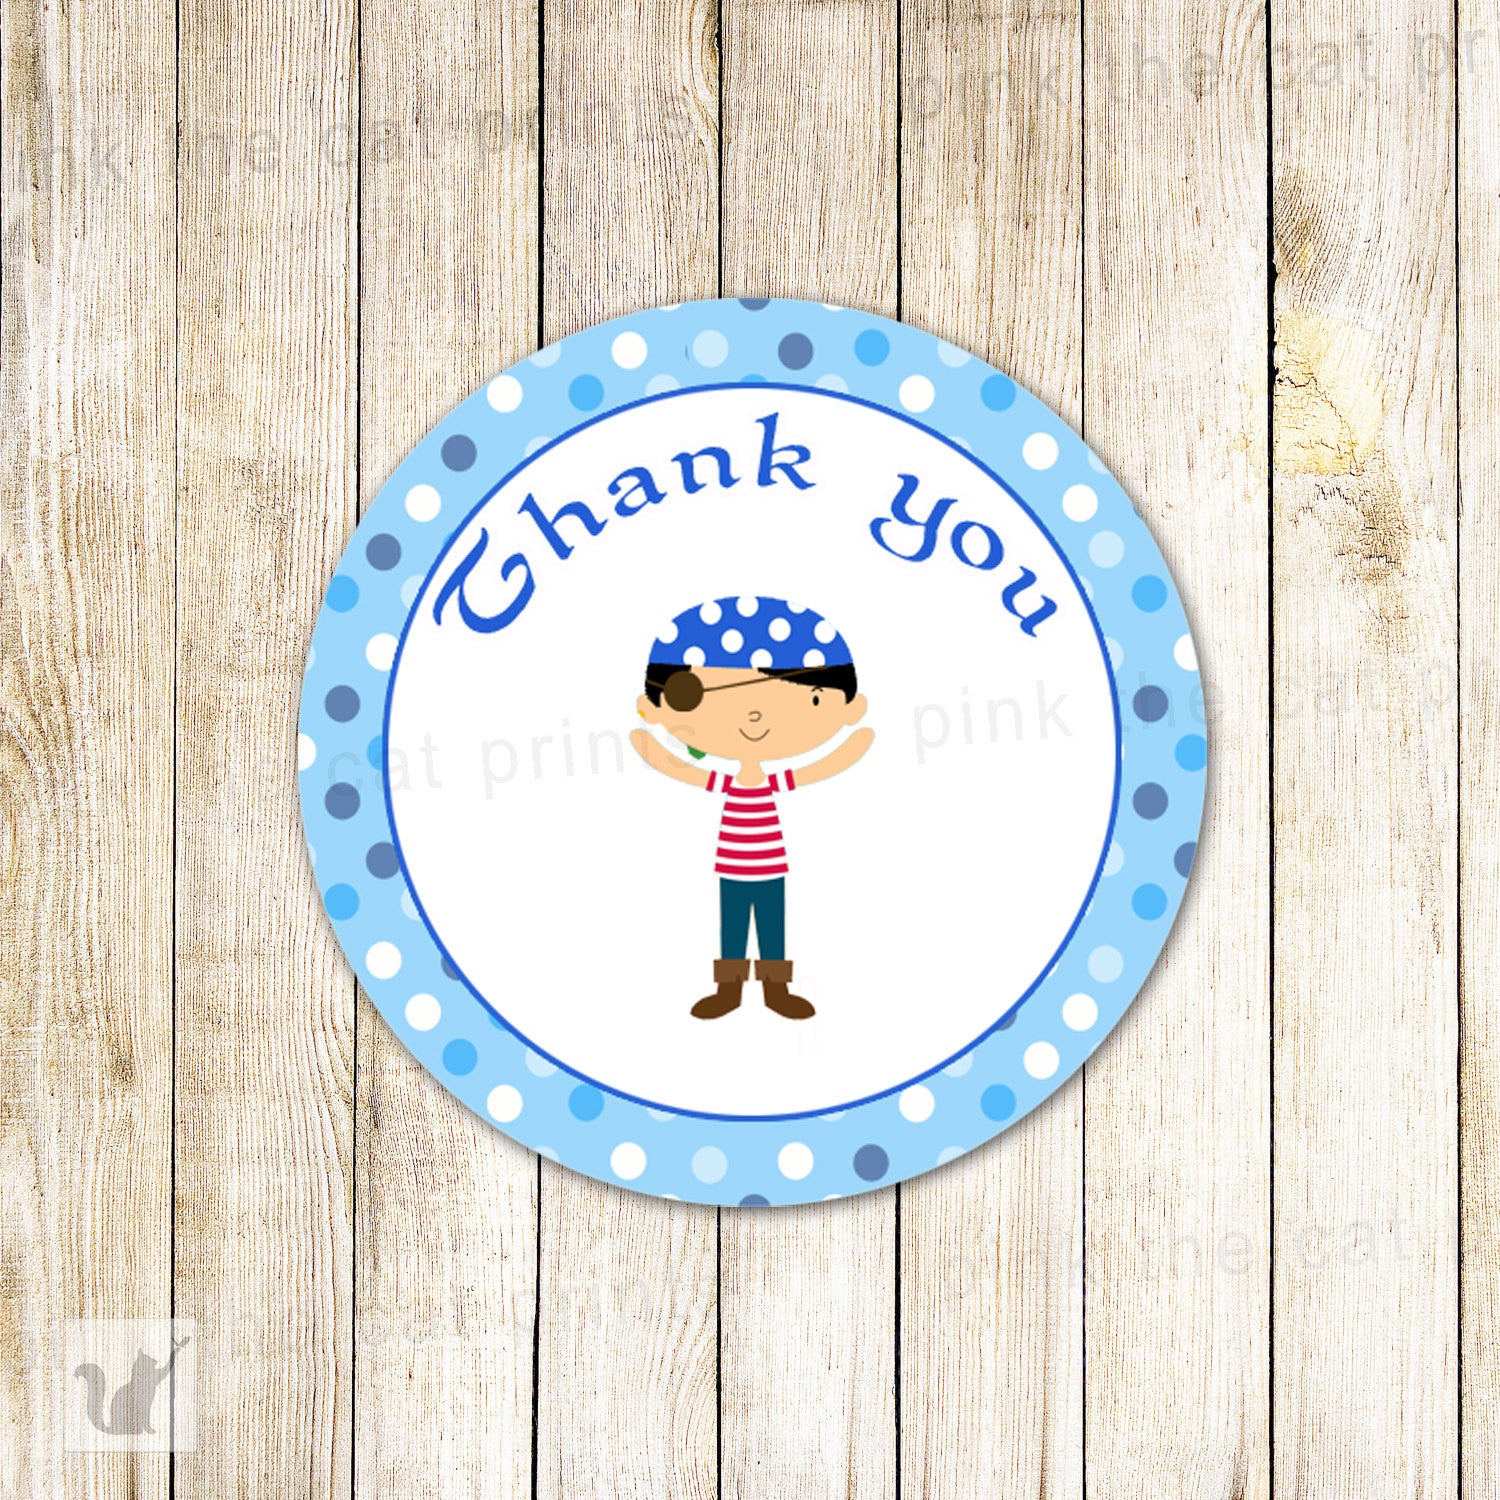 Pirate Labels - Blue Thank You Gift Favor Tags Birthday Party Baby Boy Shower Printable INSTANT DOWNLOAD